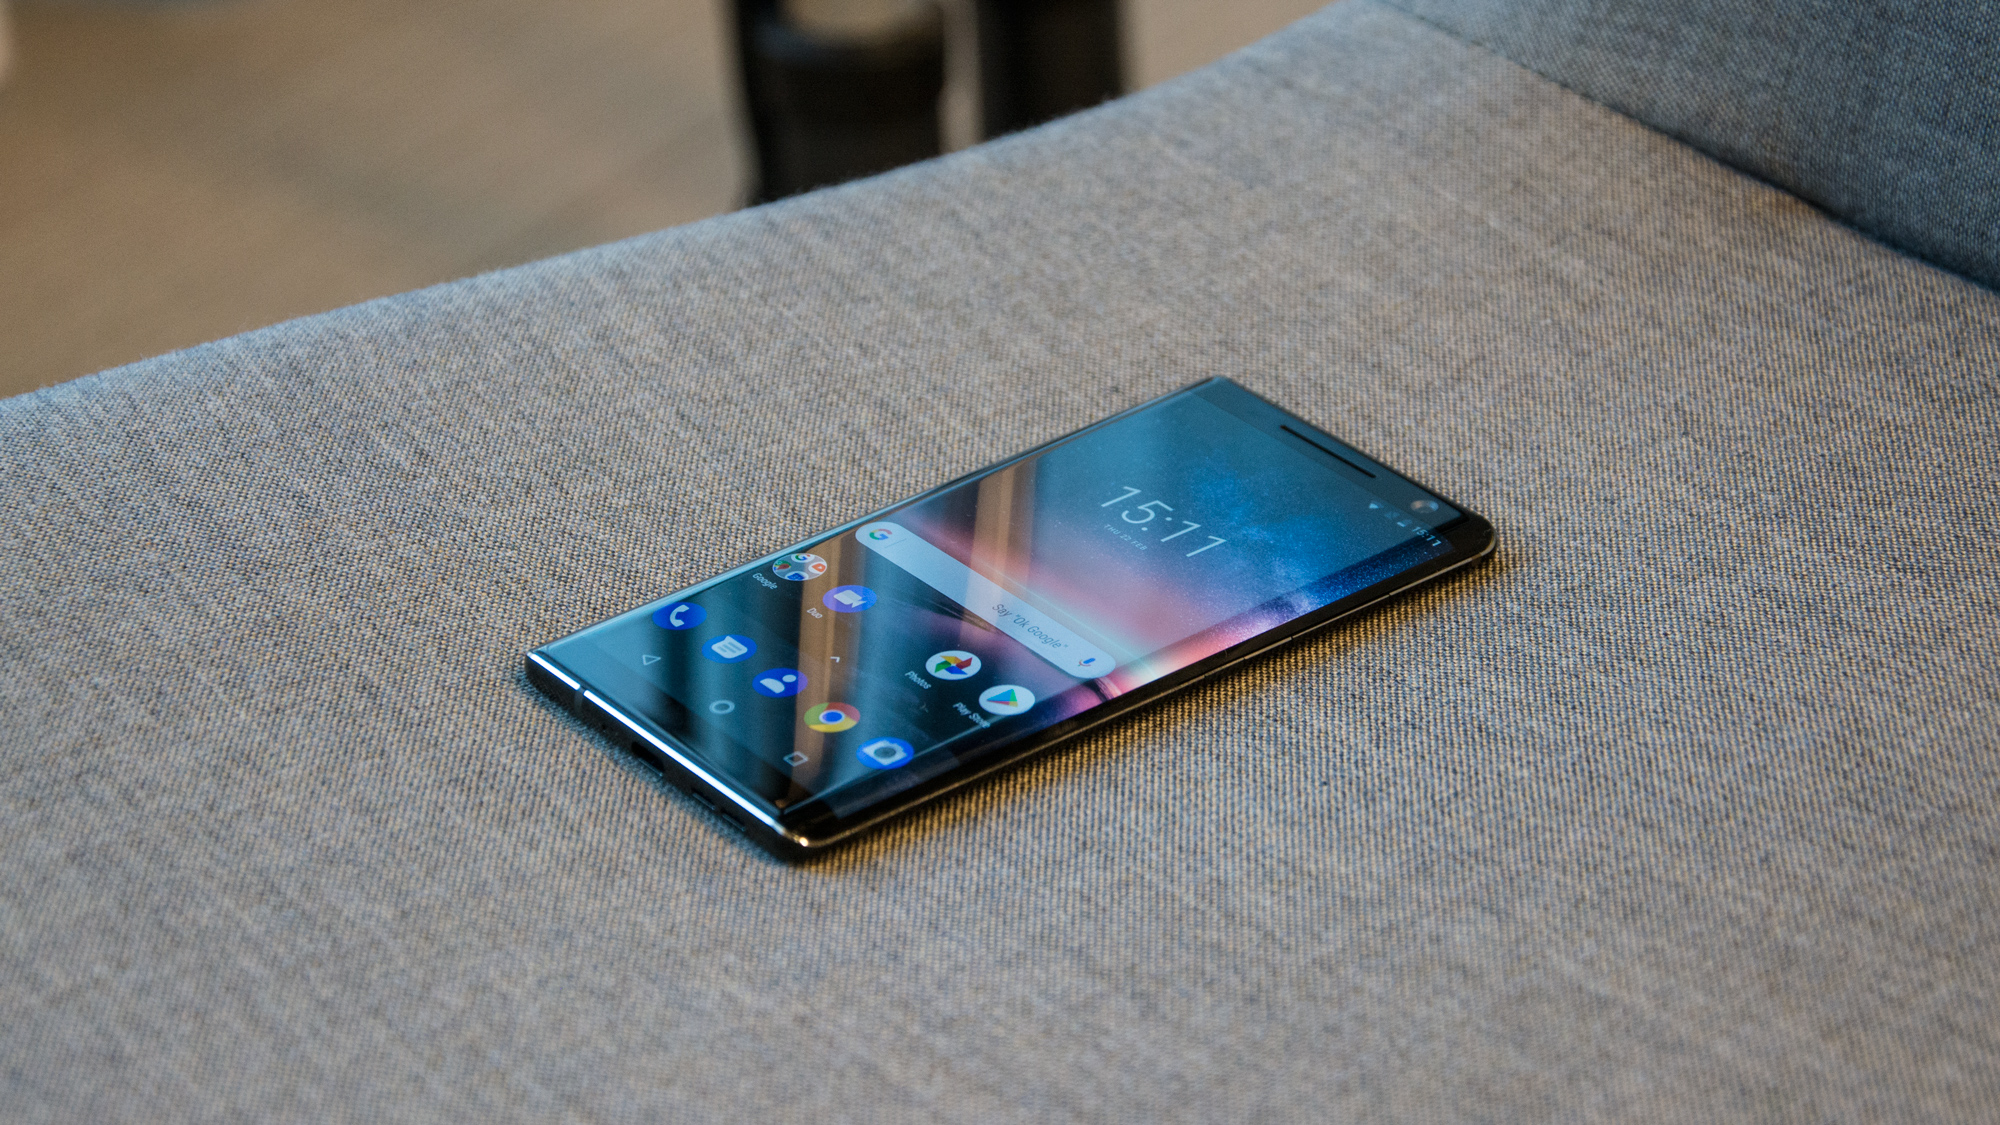 Nokia 8 Sirocco is the Nokia 8, but even more beautiful